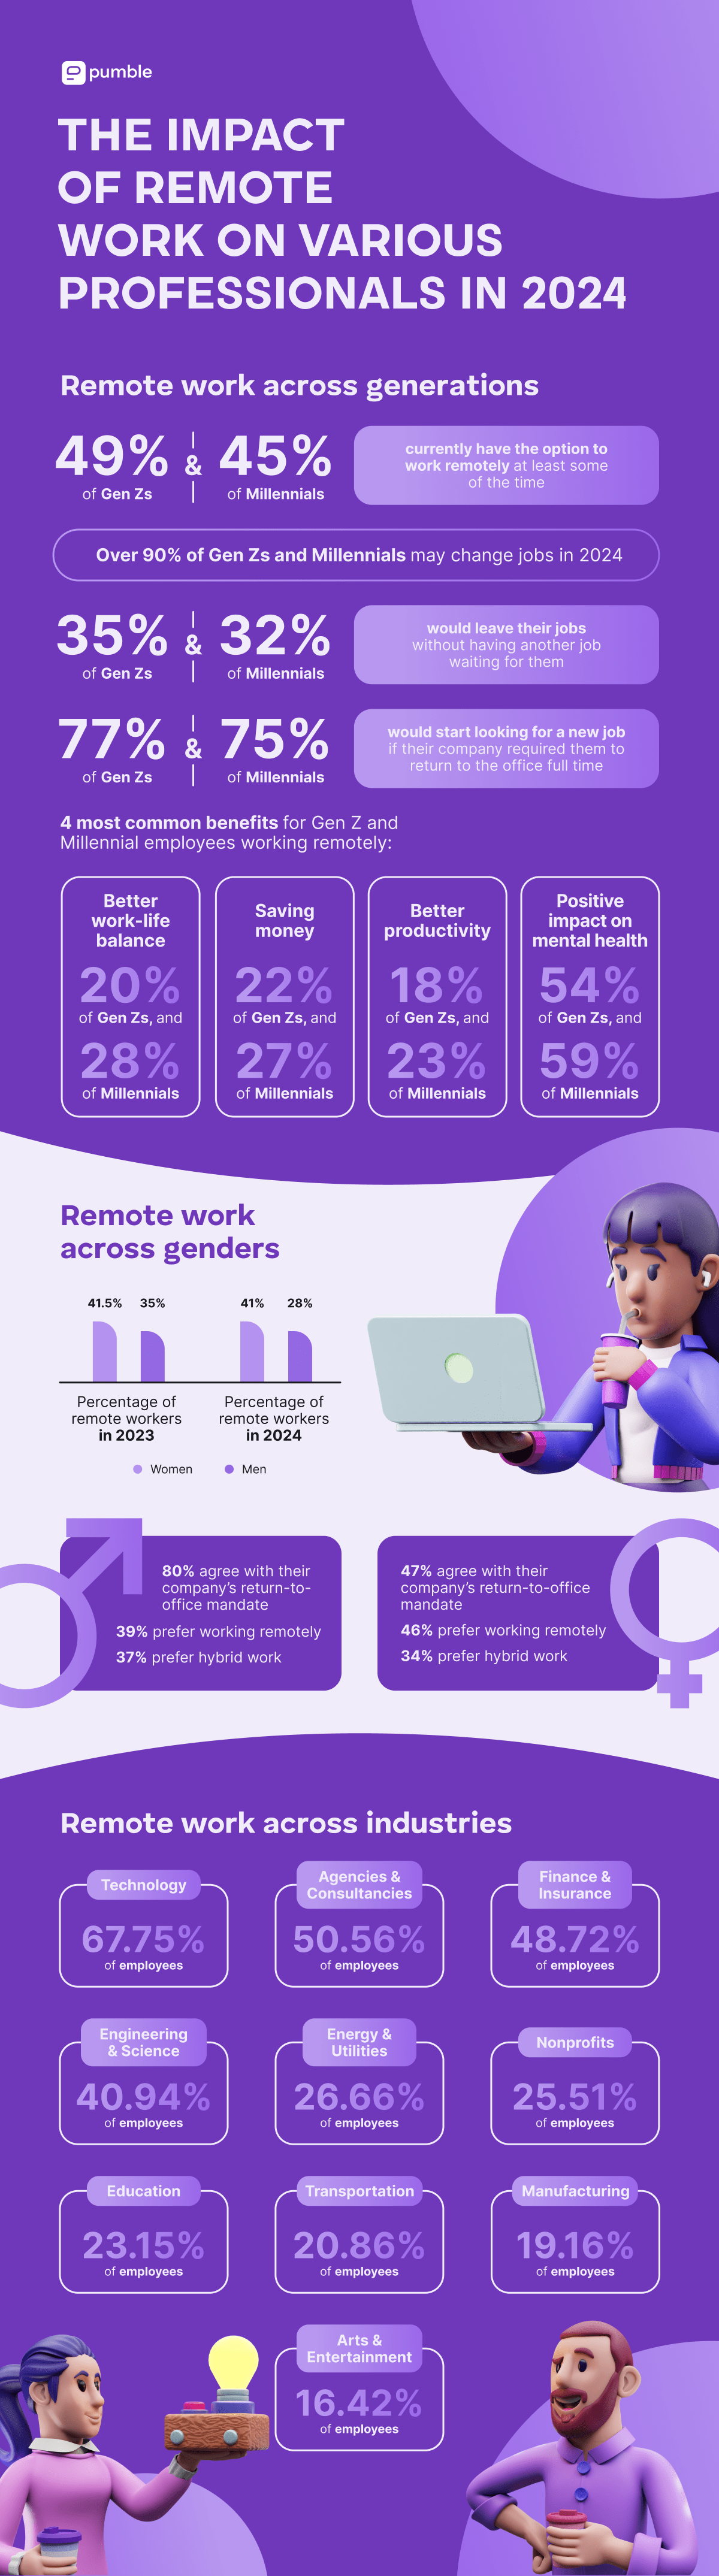 The impact of remote work on various professionals in 2024
